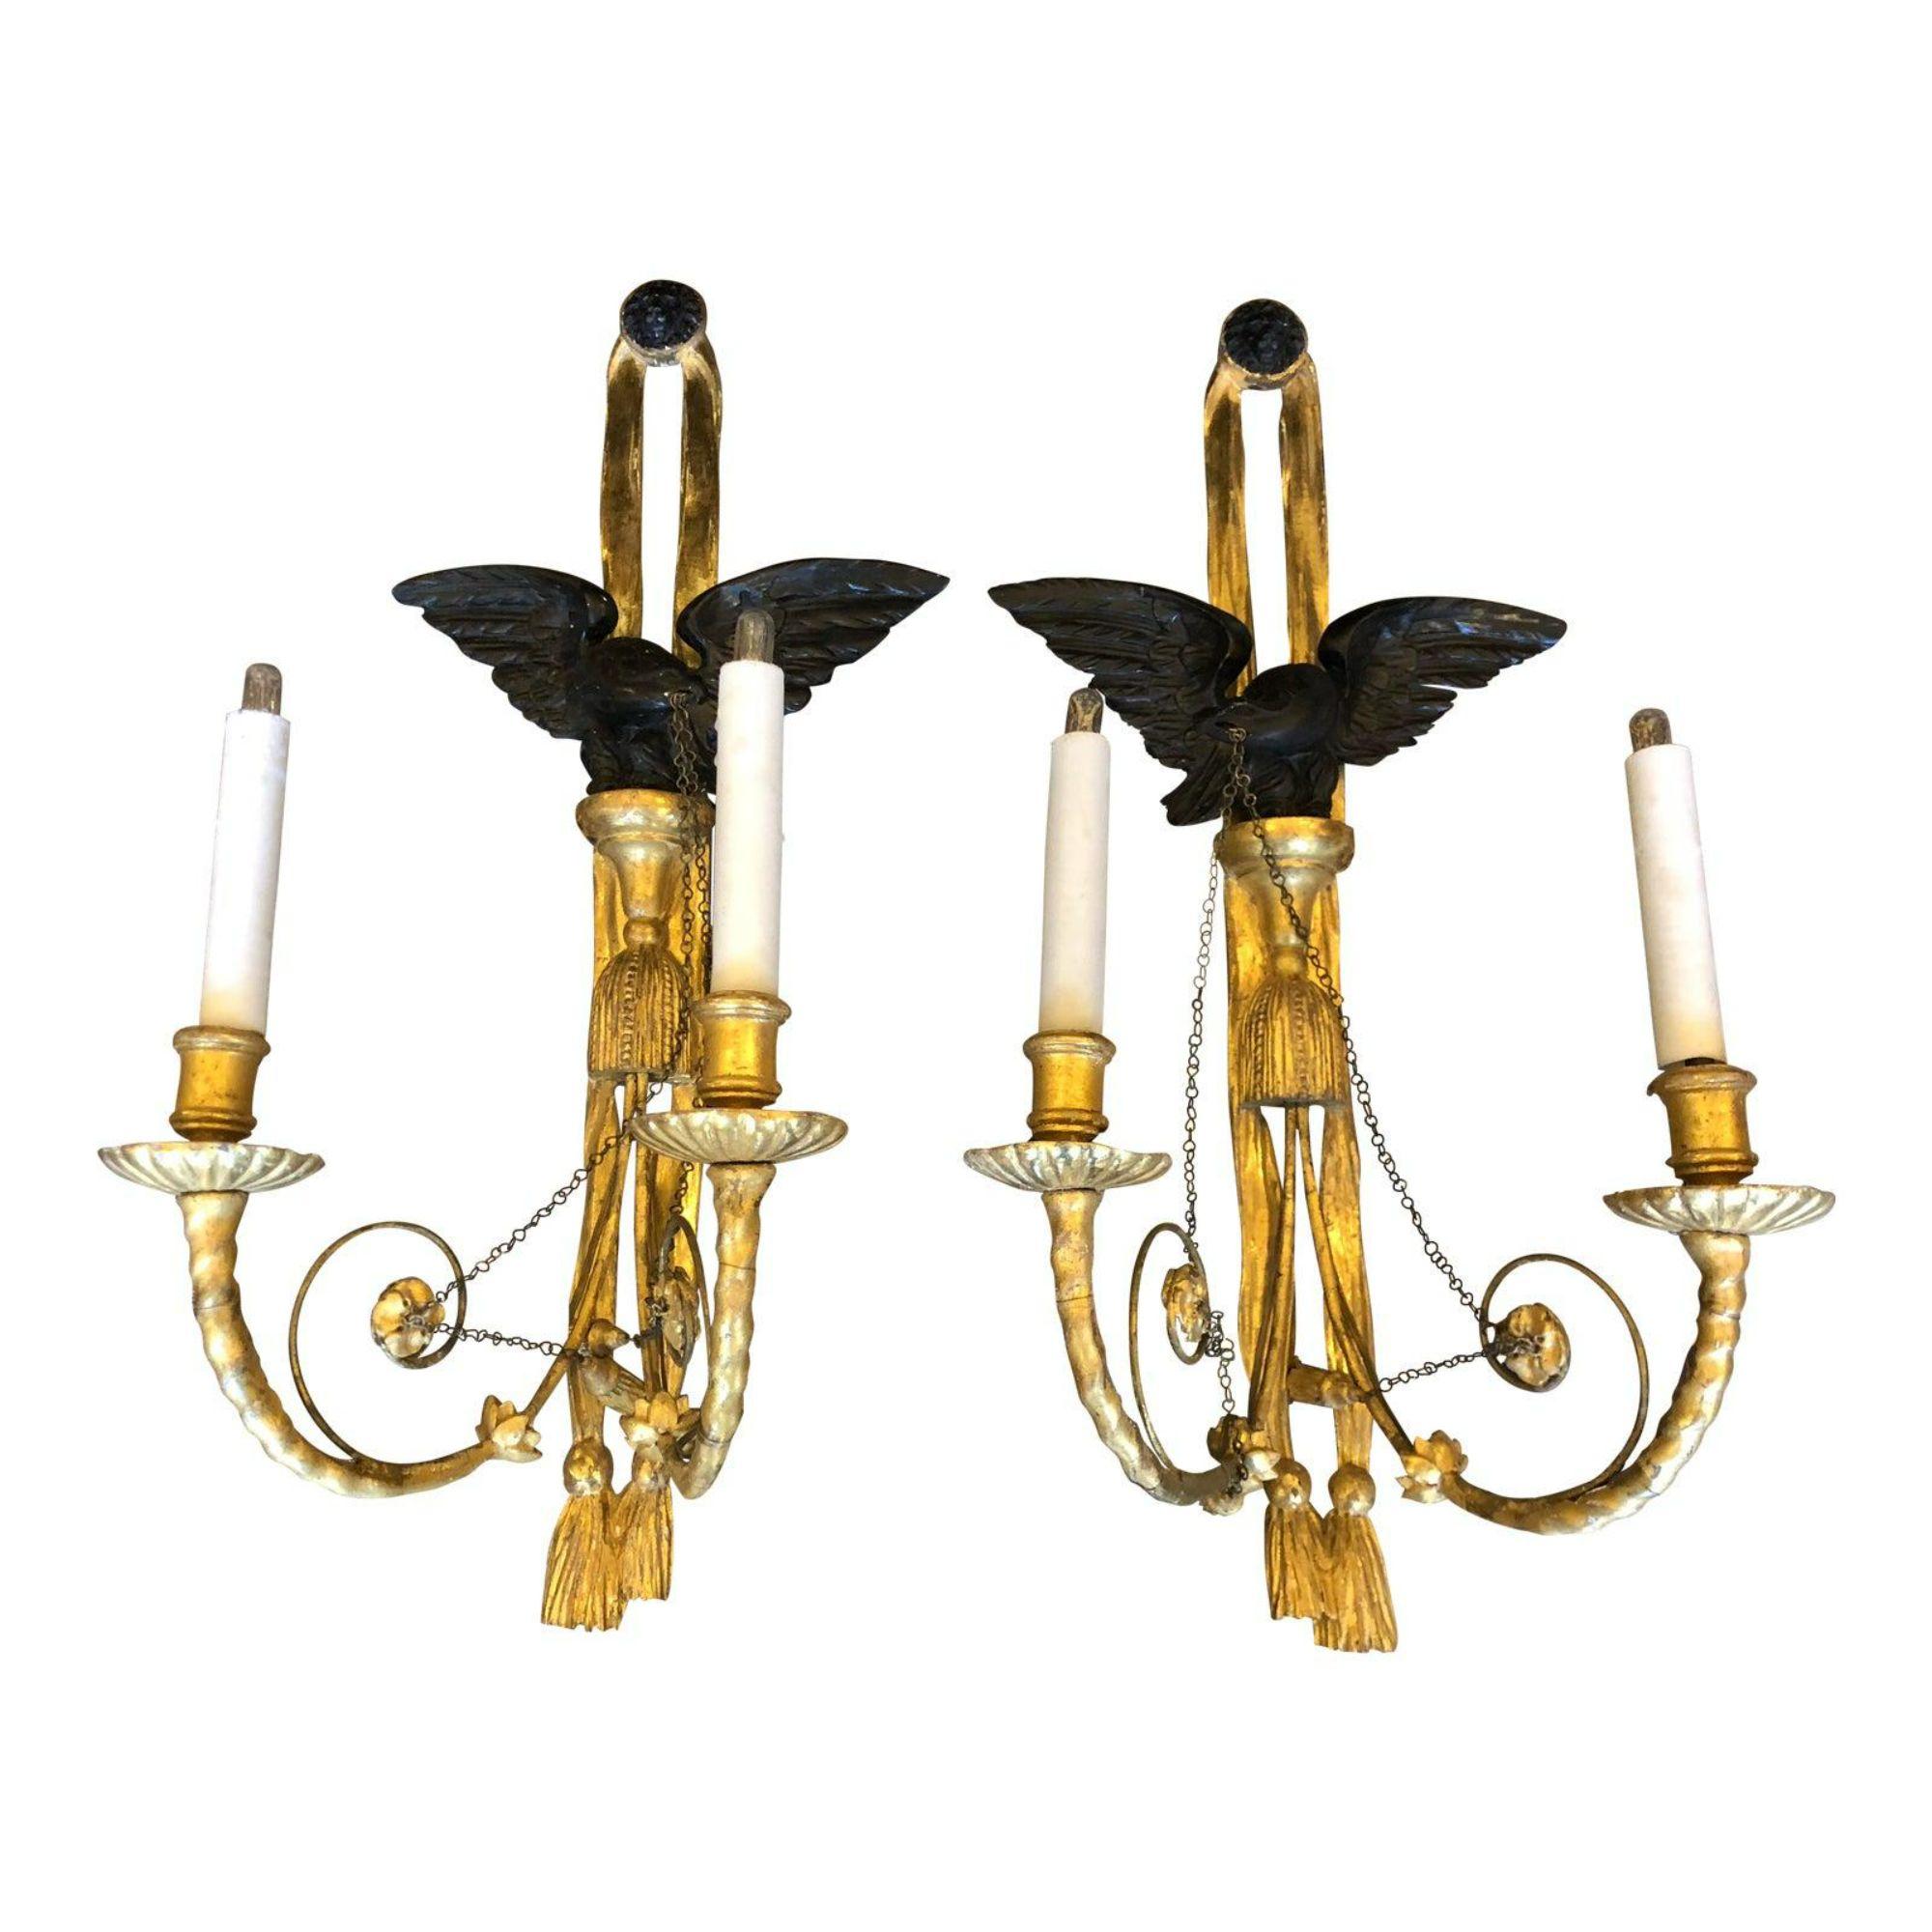 Pair of Antique Louis XVI Style giltwood wall sconces

Additional information: 
Materials: Wood
Color: Gold
Period: early 19th century
Place of Origin: France
Styles: Federal
Lamp Shade: Not Included
Power Sources: Up to 120V (US Standard),